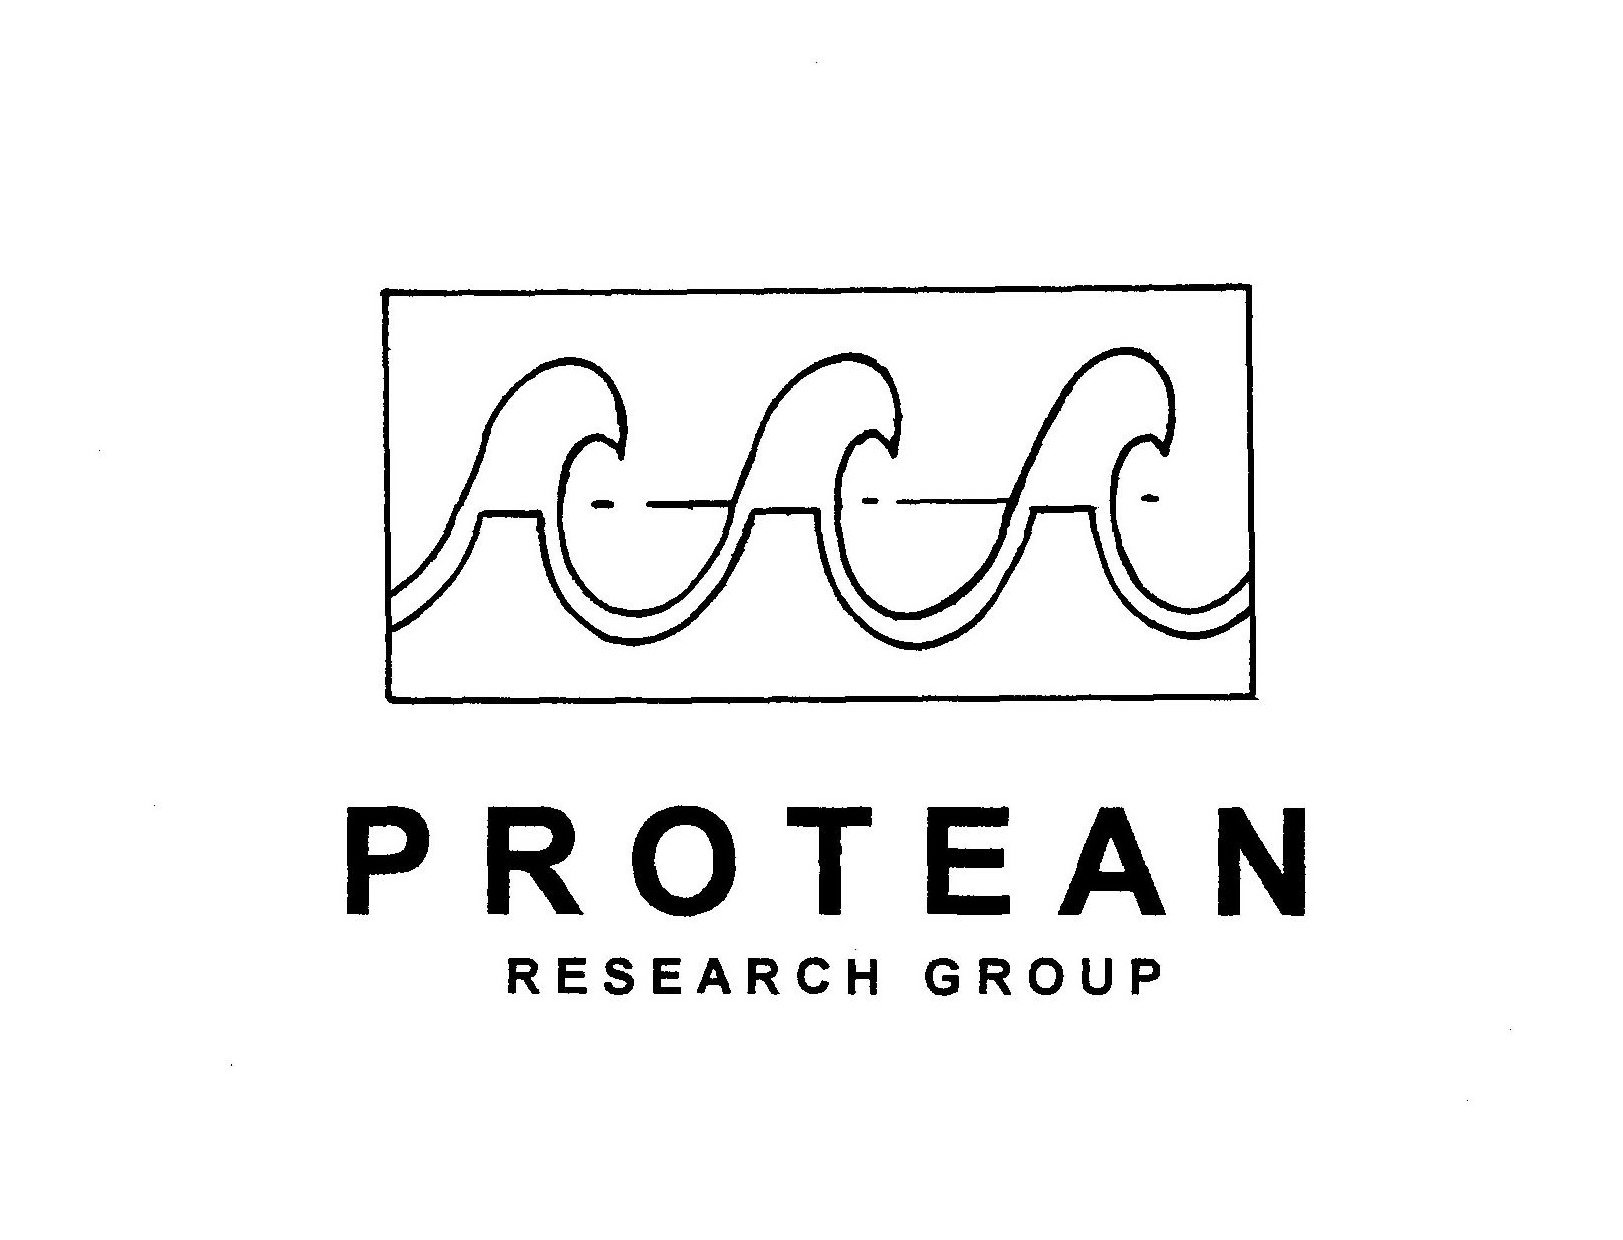  PROTEAN RESEARCH GROUP